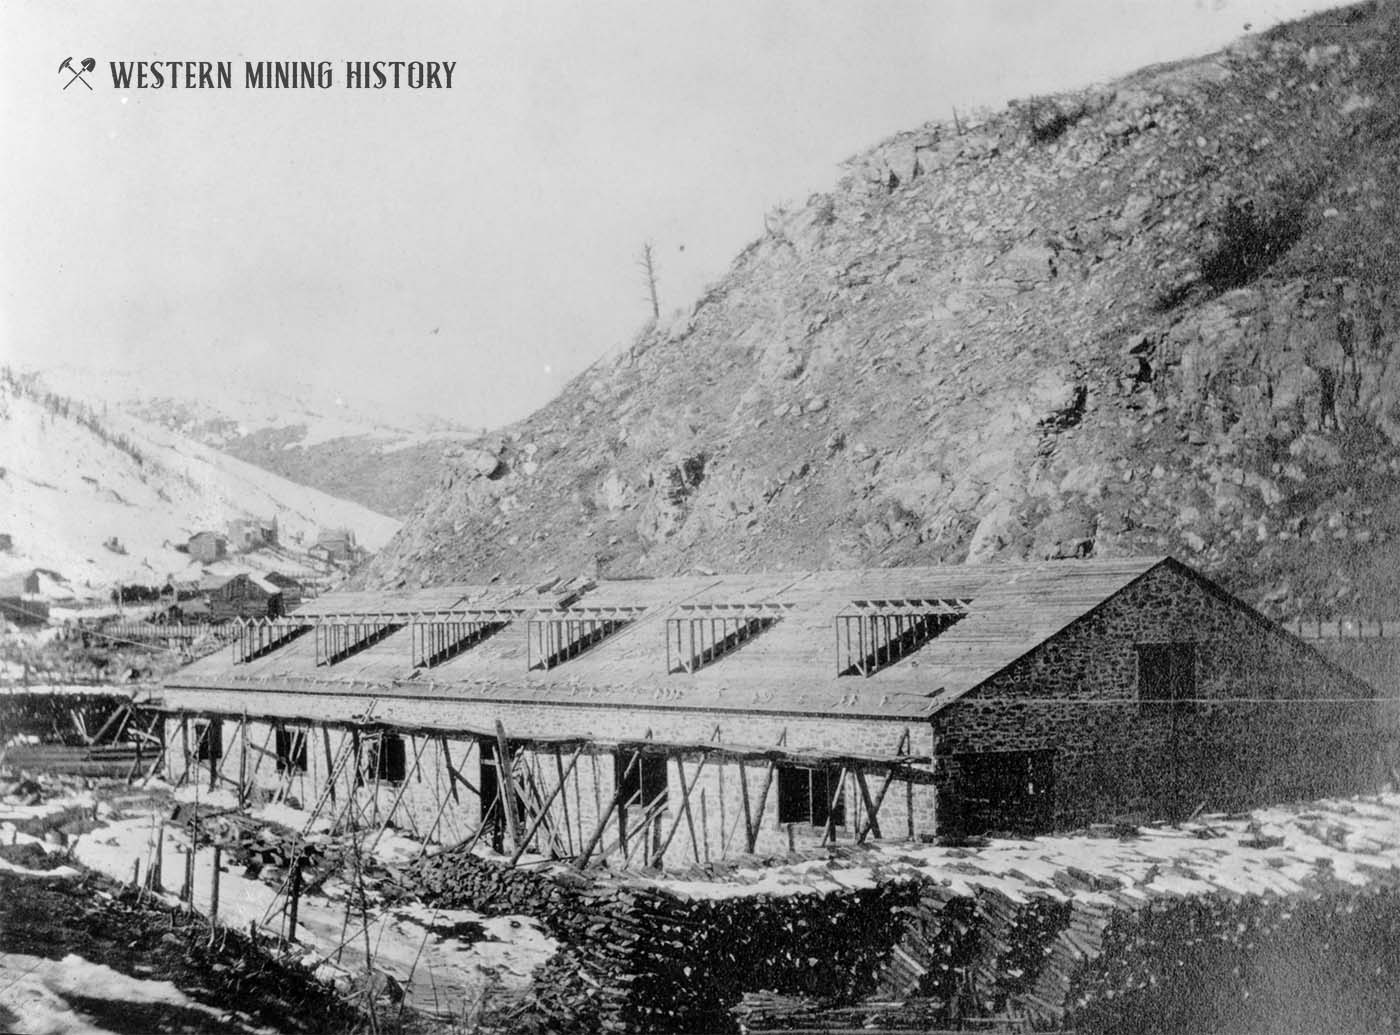  Construction of the Gunnell Gold Company Mill - Black Hawk 1864